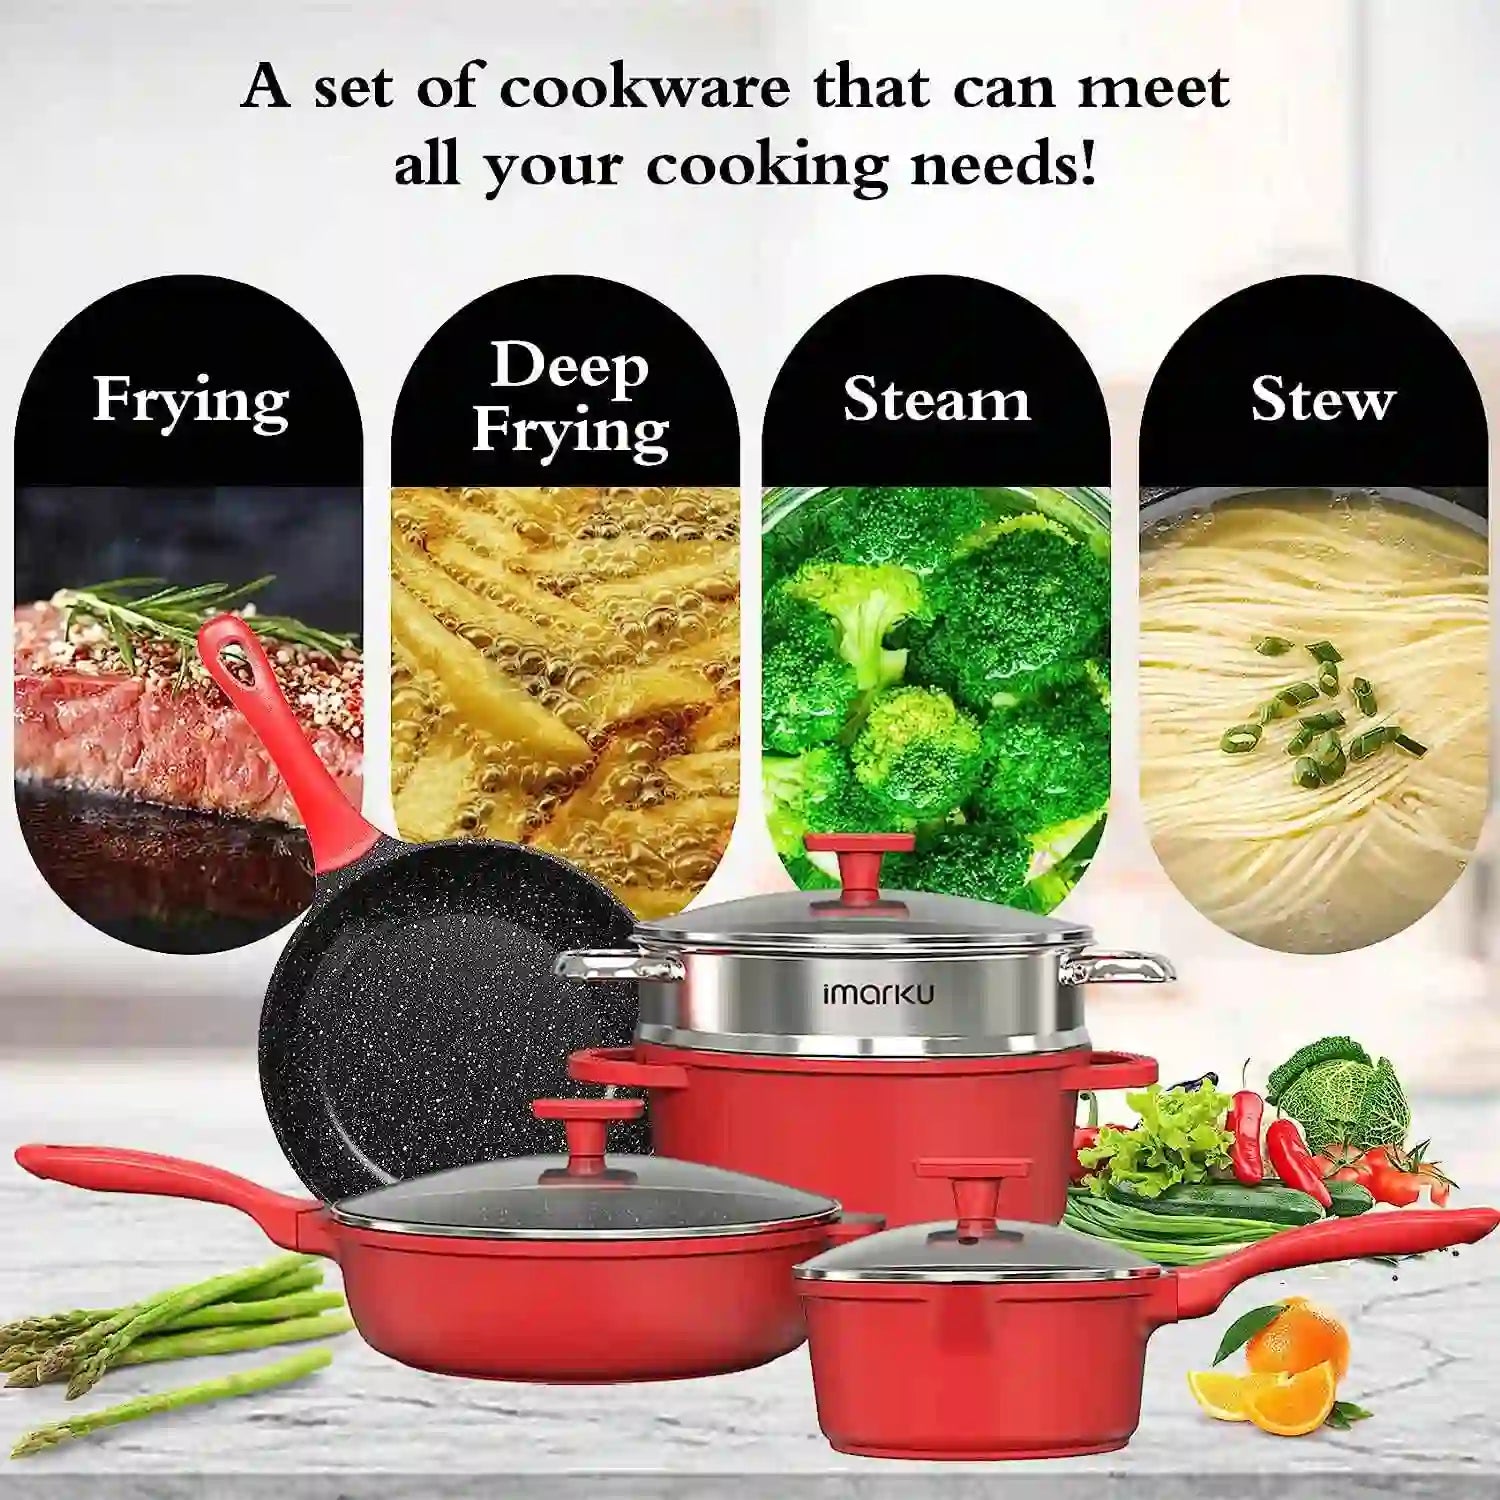 imarku PFOA Free Pots and Pans Set with Granite Coating, Nonstick 16  Pieces, Kitchen Cookware Set Suitable for All Cooktop,Cooking, Gift  Cookware, Red [Video] [Video]